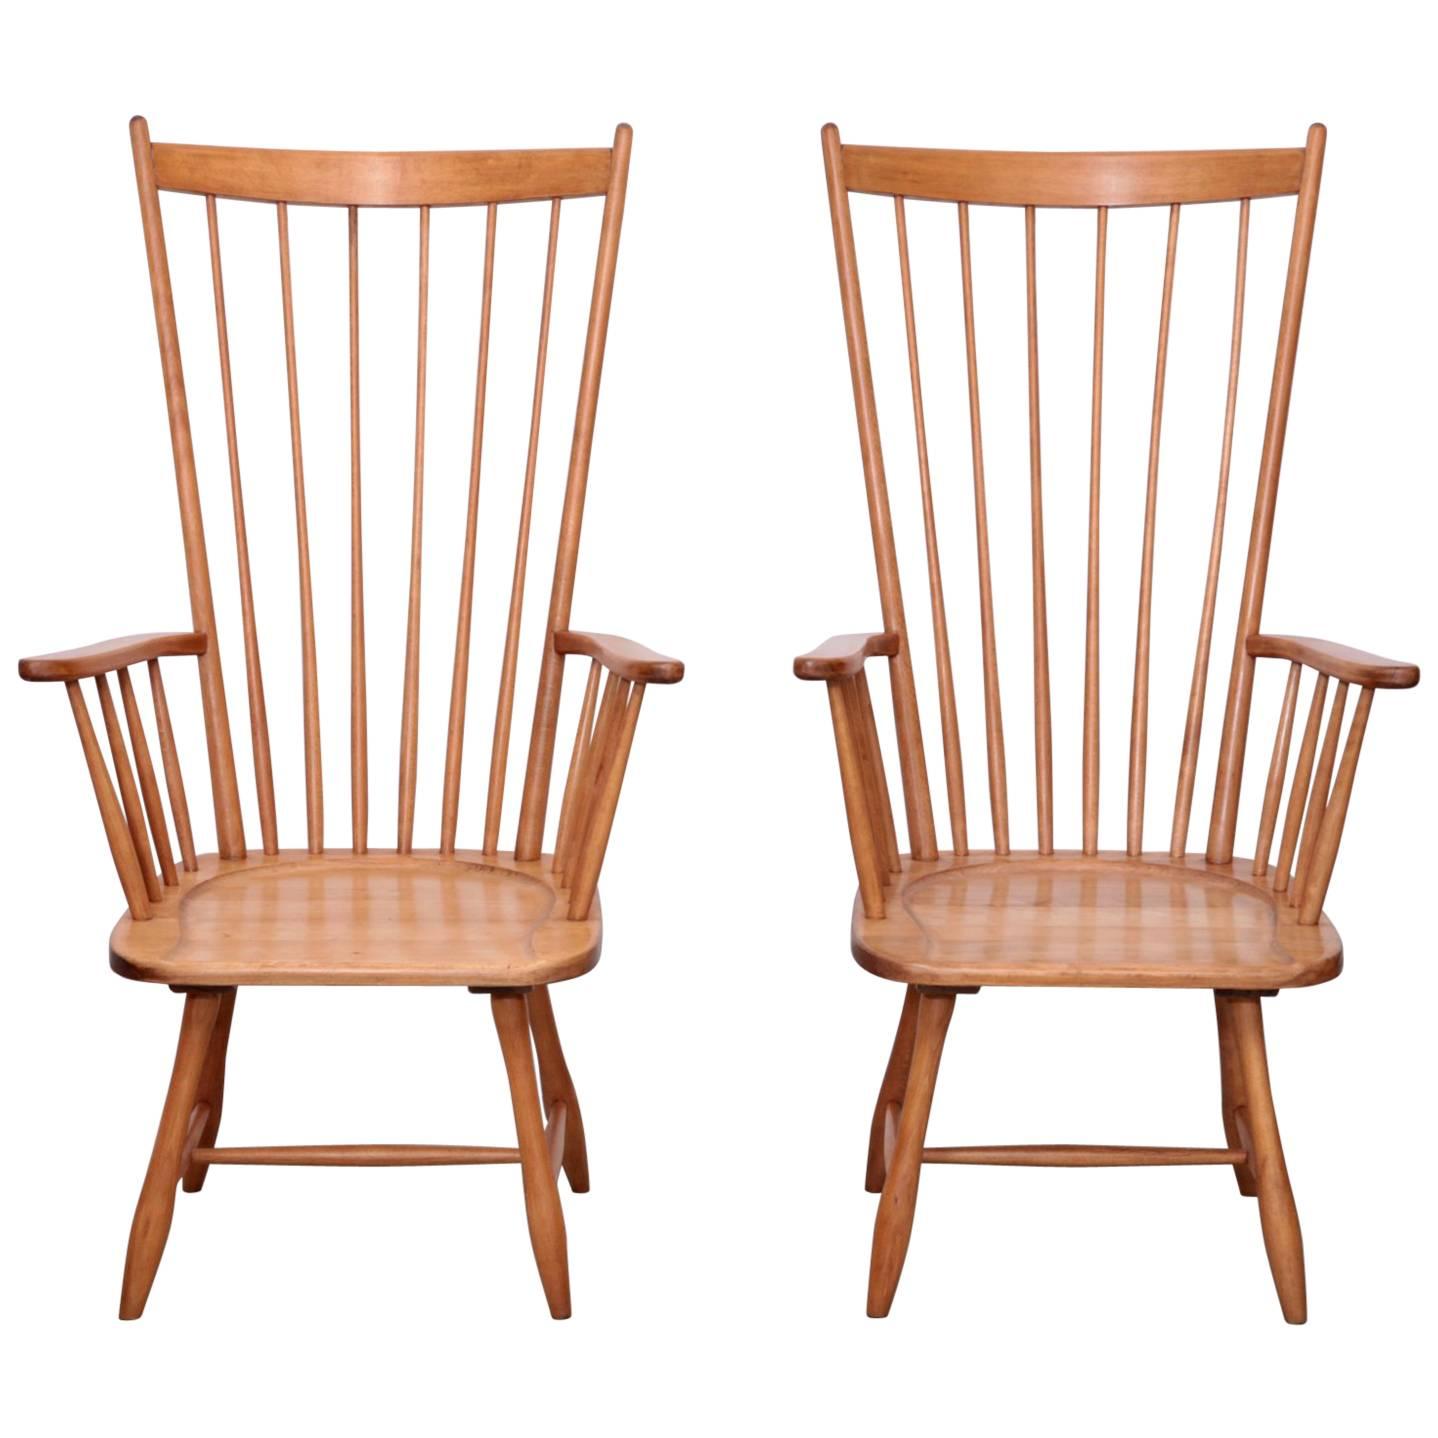 Pair of Low Arno Lambrecht Highback Windsor Lounge Chairs